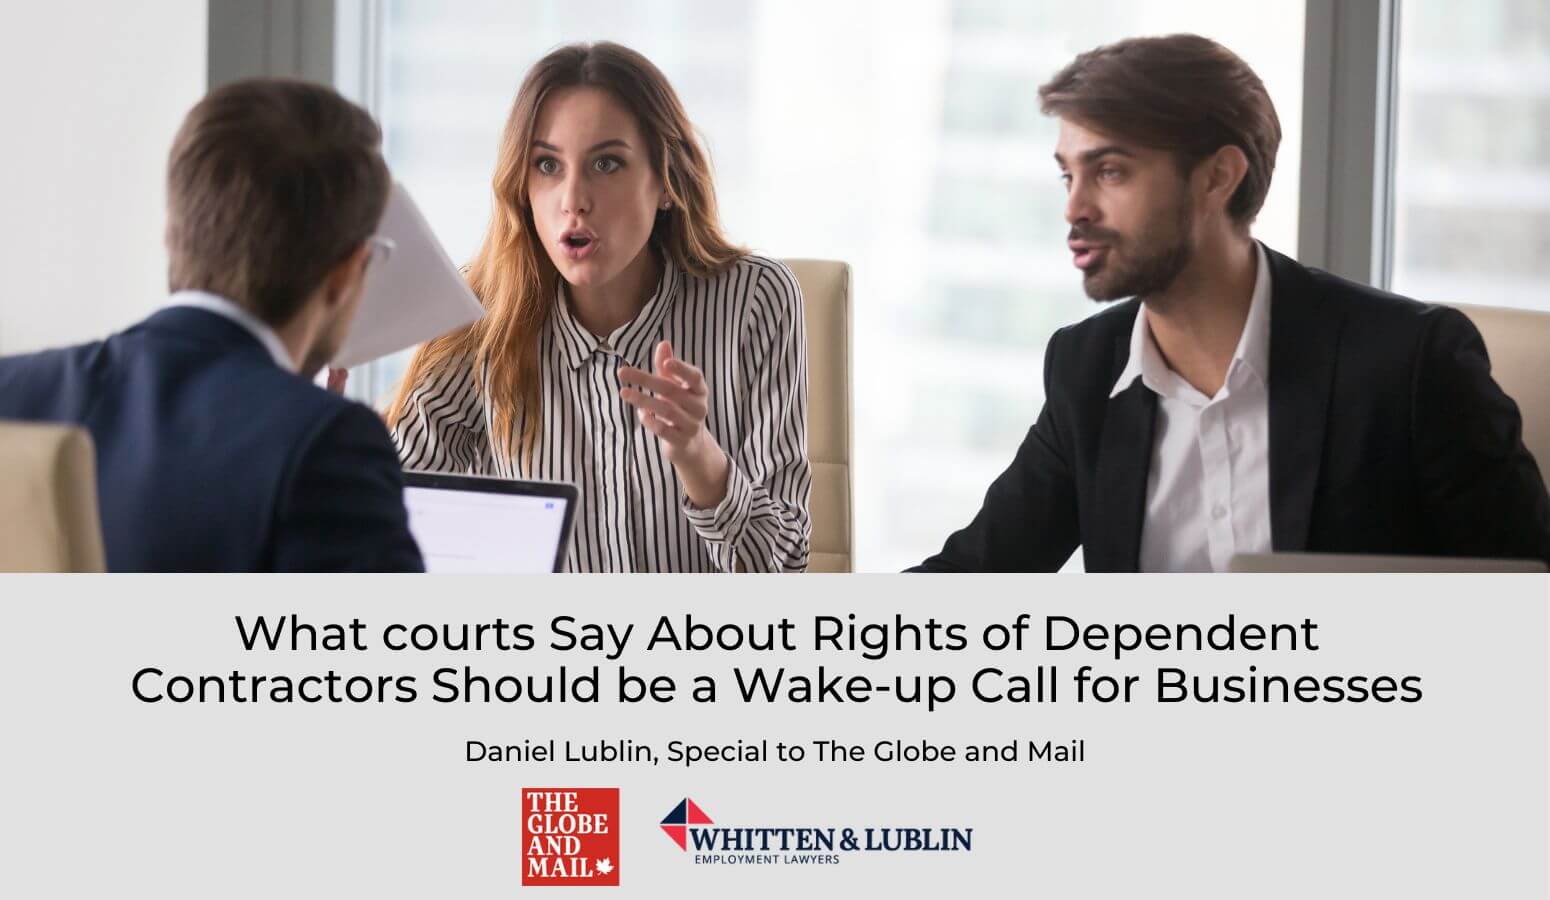 Featured image for “What courts Say About Rights of Dependent Contractors Should be a Wake-up Call for Businesses”